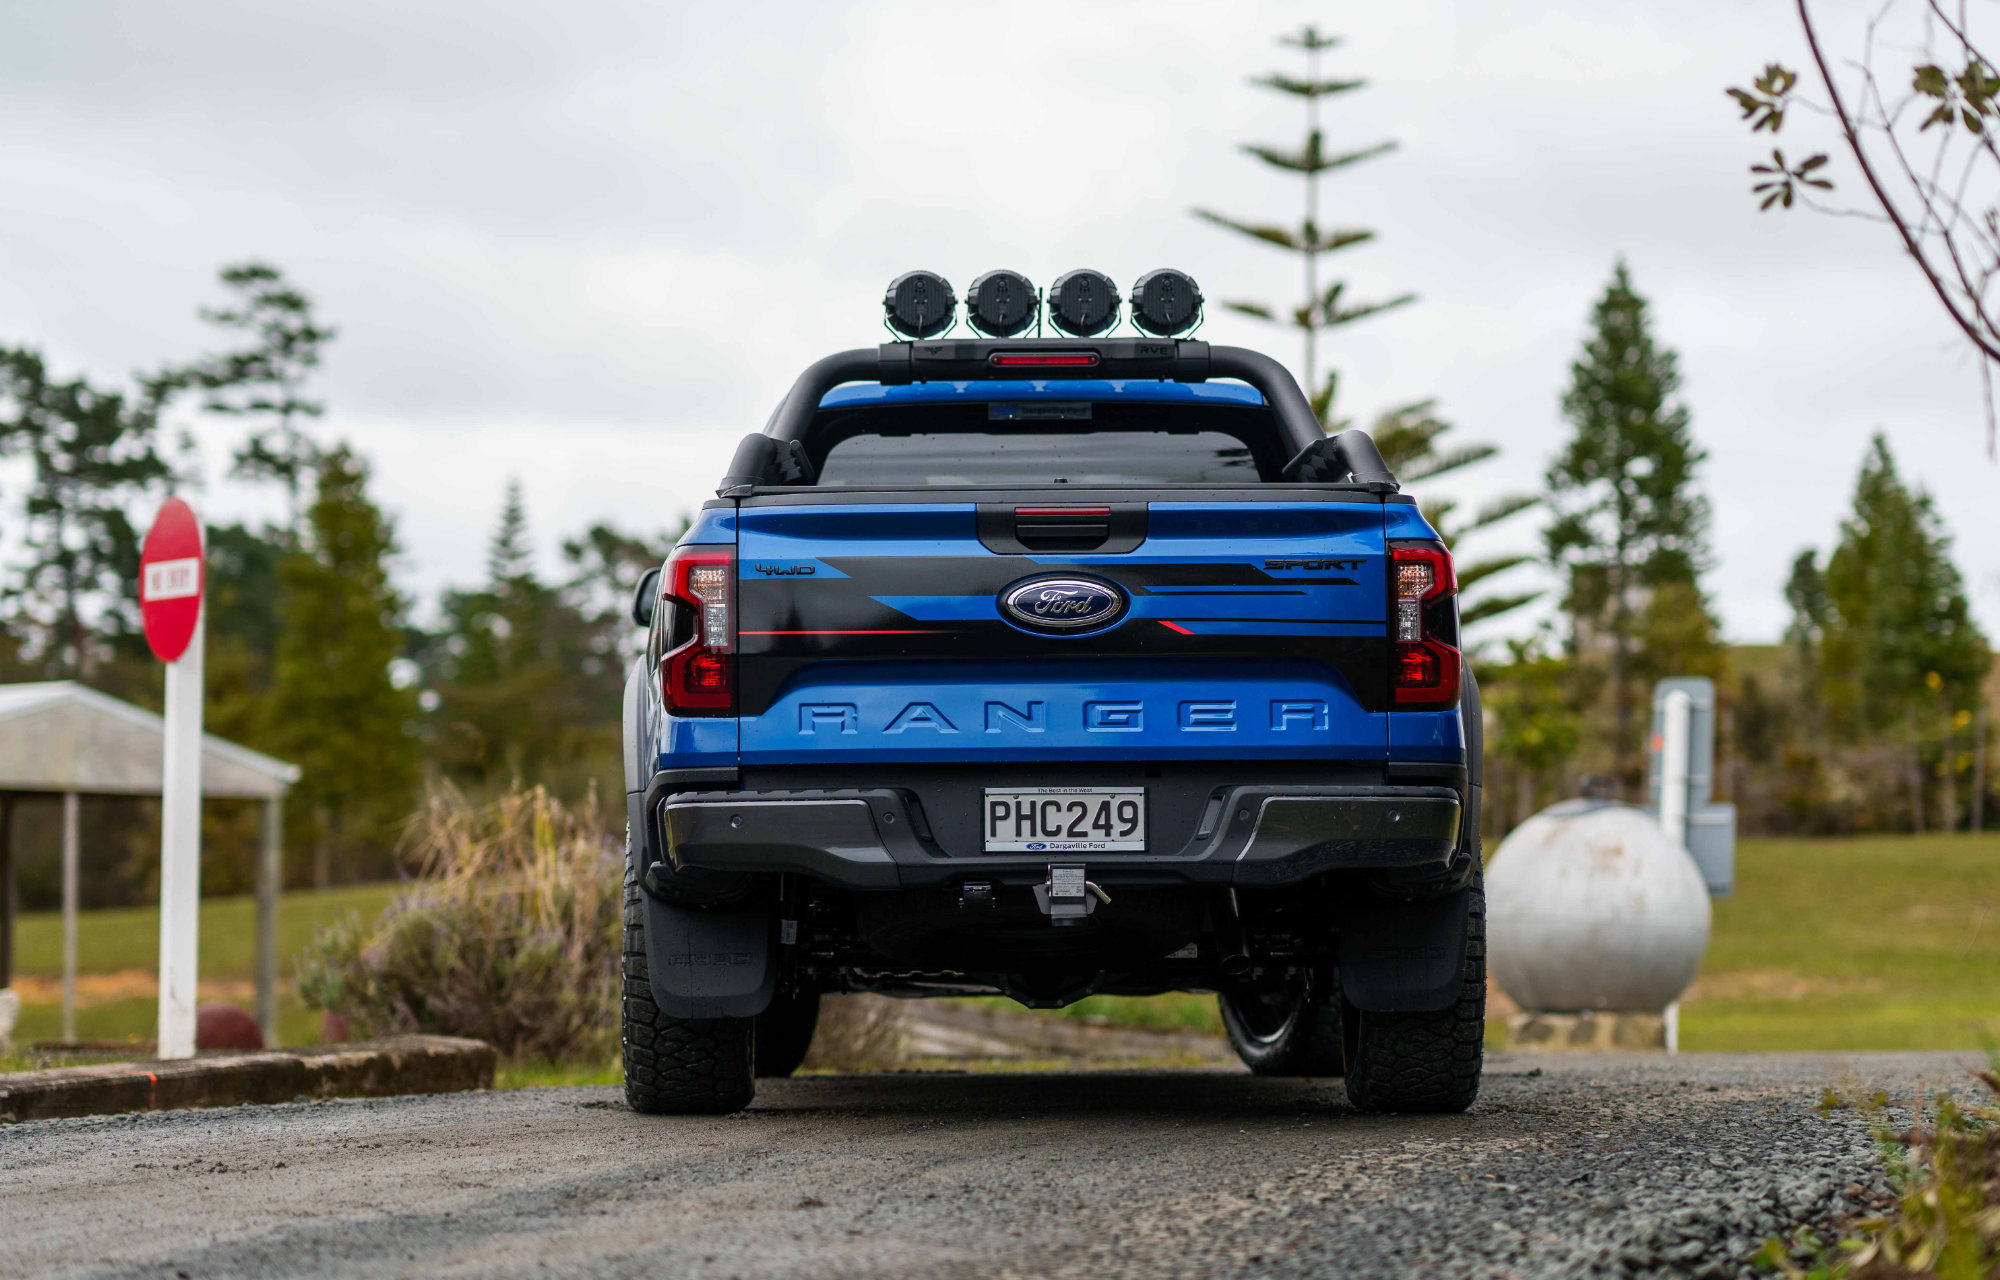 West Coast Edition Ford Ranger Rear View